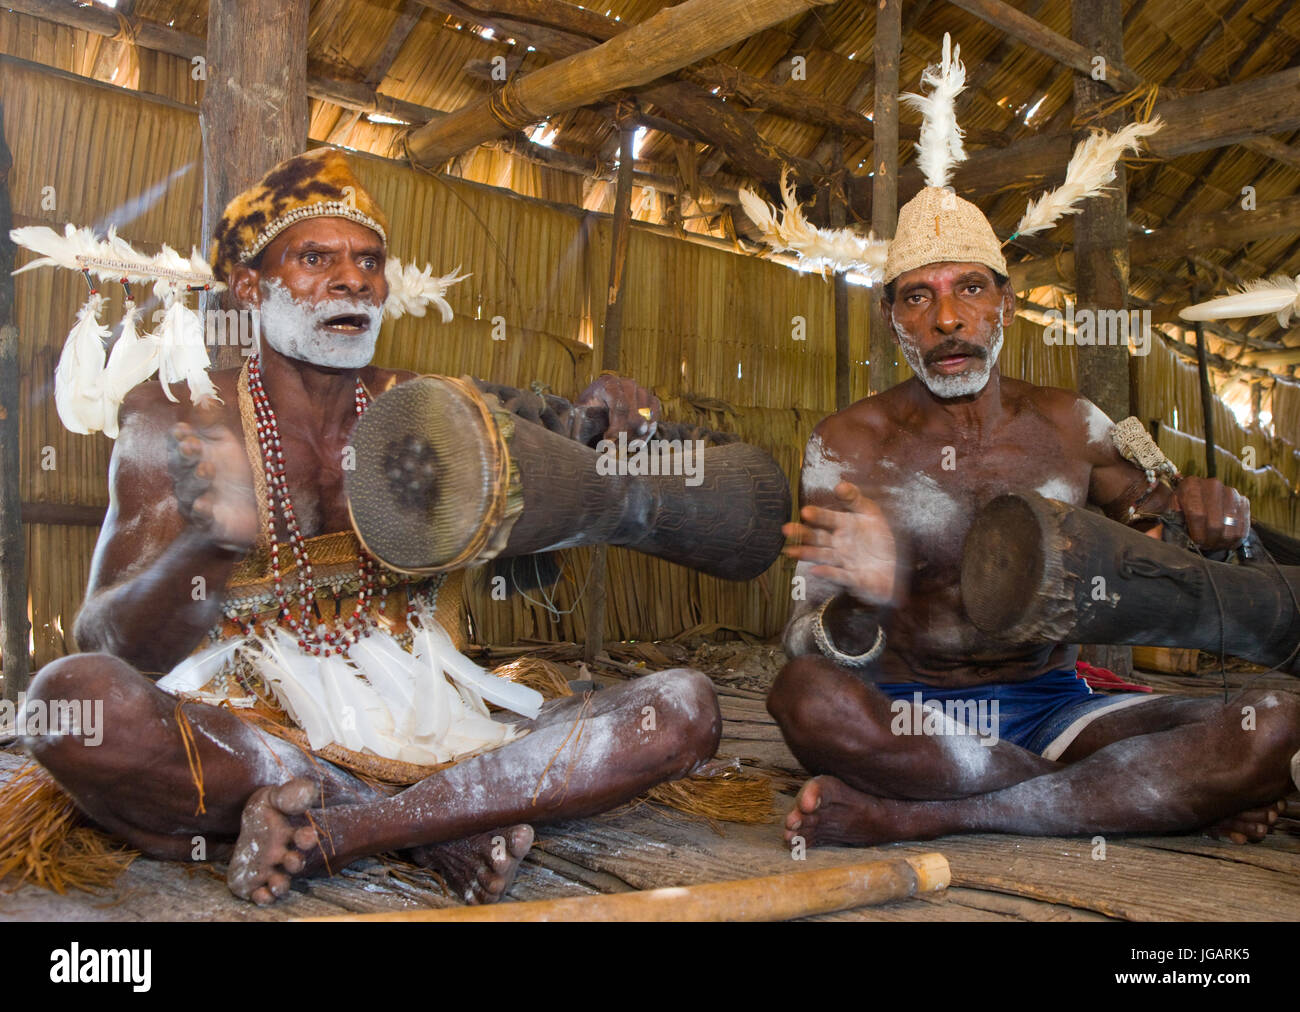 INDONESIA, IRIAN JAYA, ASMAT PROVINCE, JOW VILLAGE - JANUARY 19: Men Asmat tribe are sitting at home and play on the drum. Stock Photo